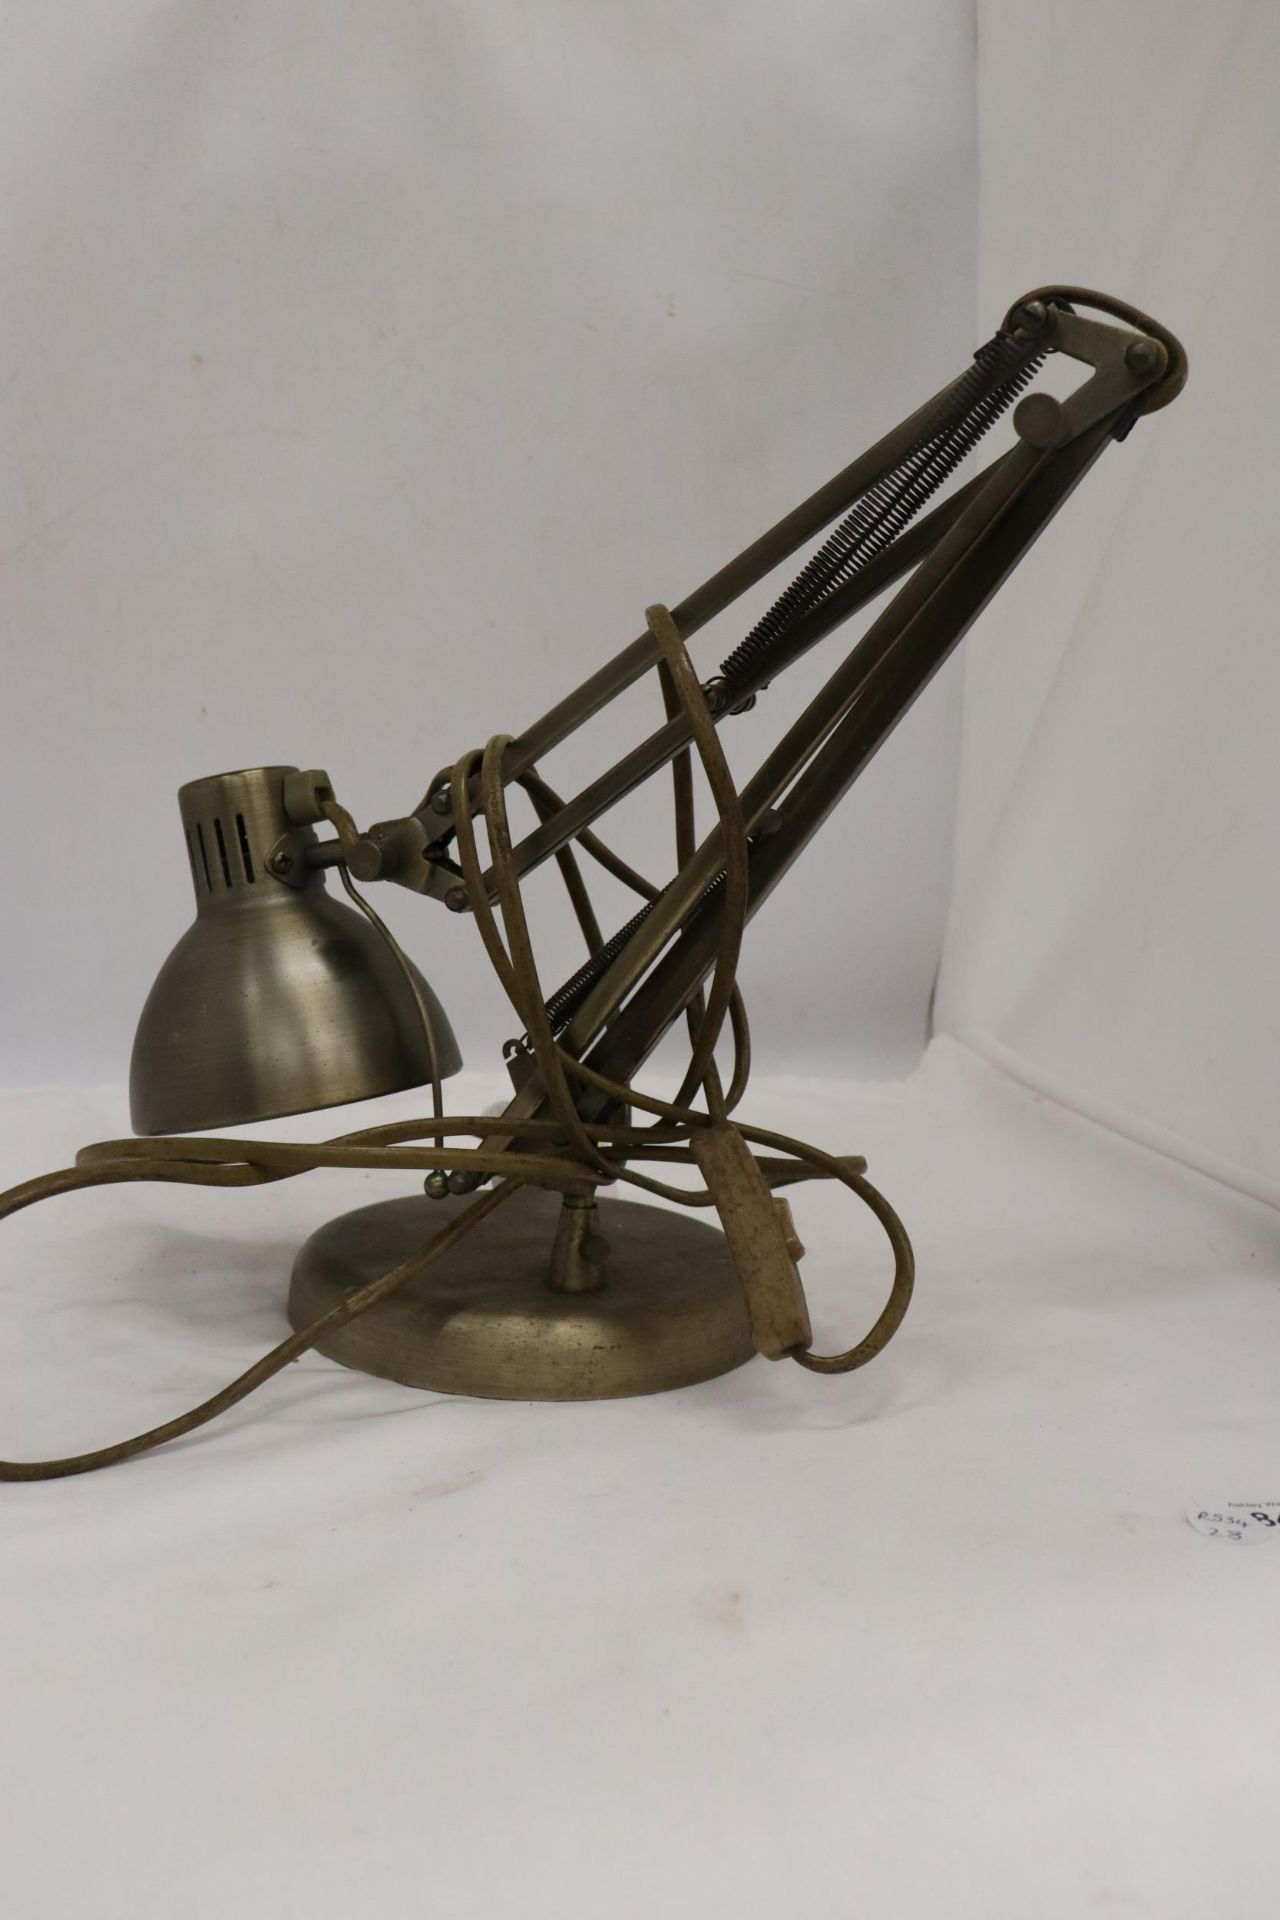 A VINTAGE METAL ANGLEPOISE LAMP - Image 4 of 7